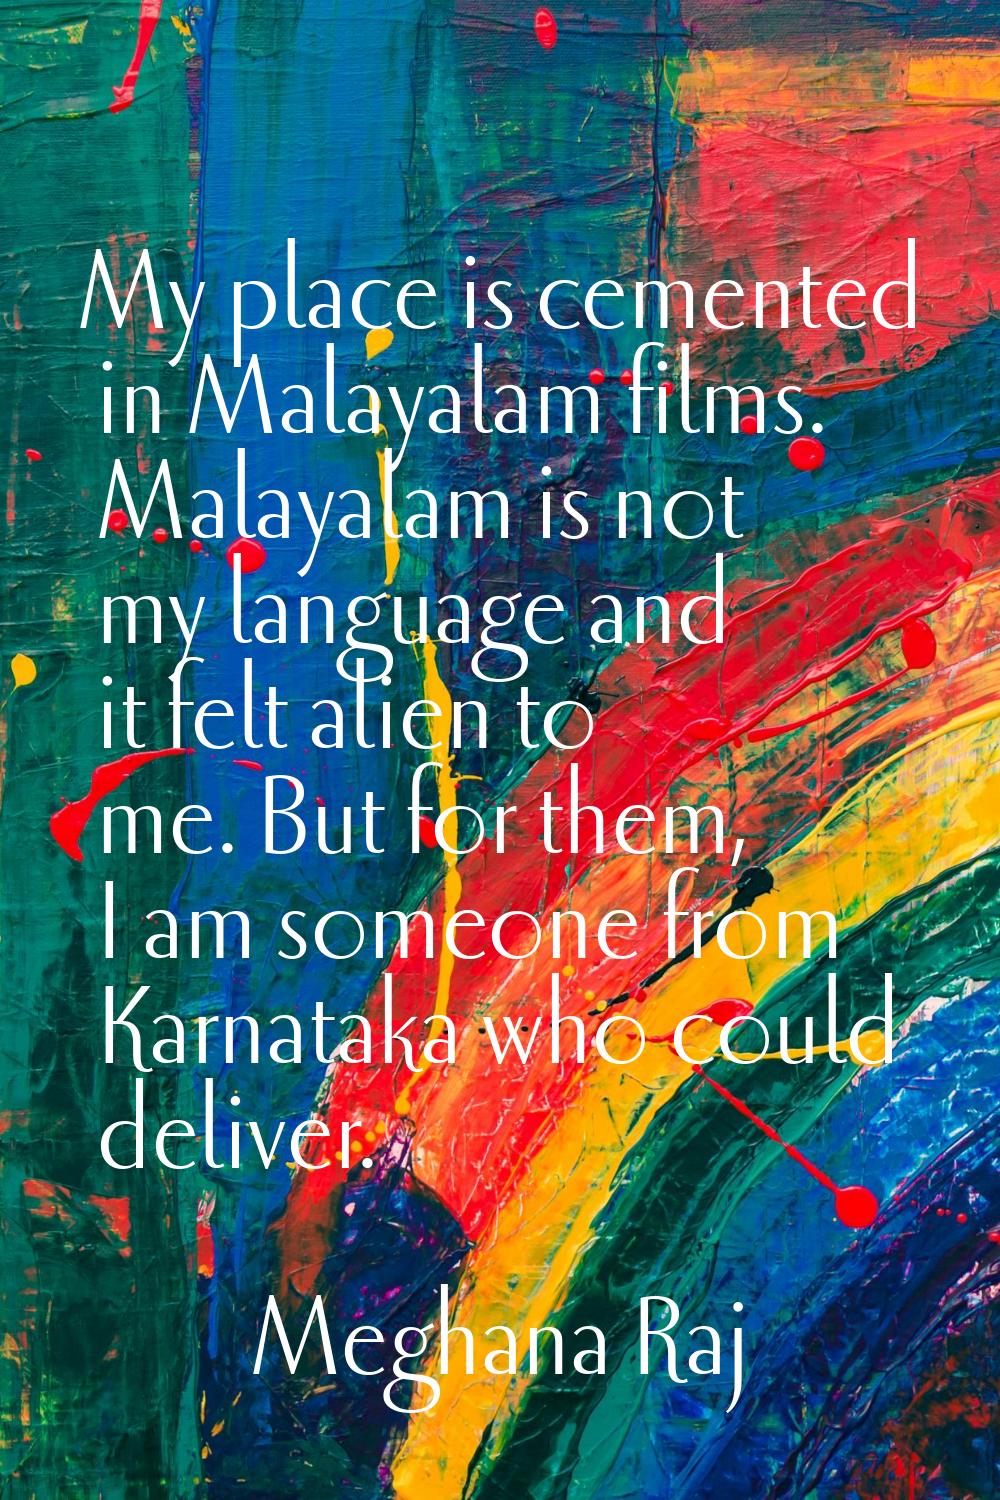 My place is cemented in Malayalam films. Malayalam is not my language and it felt alien to me. But 